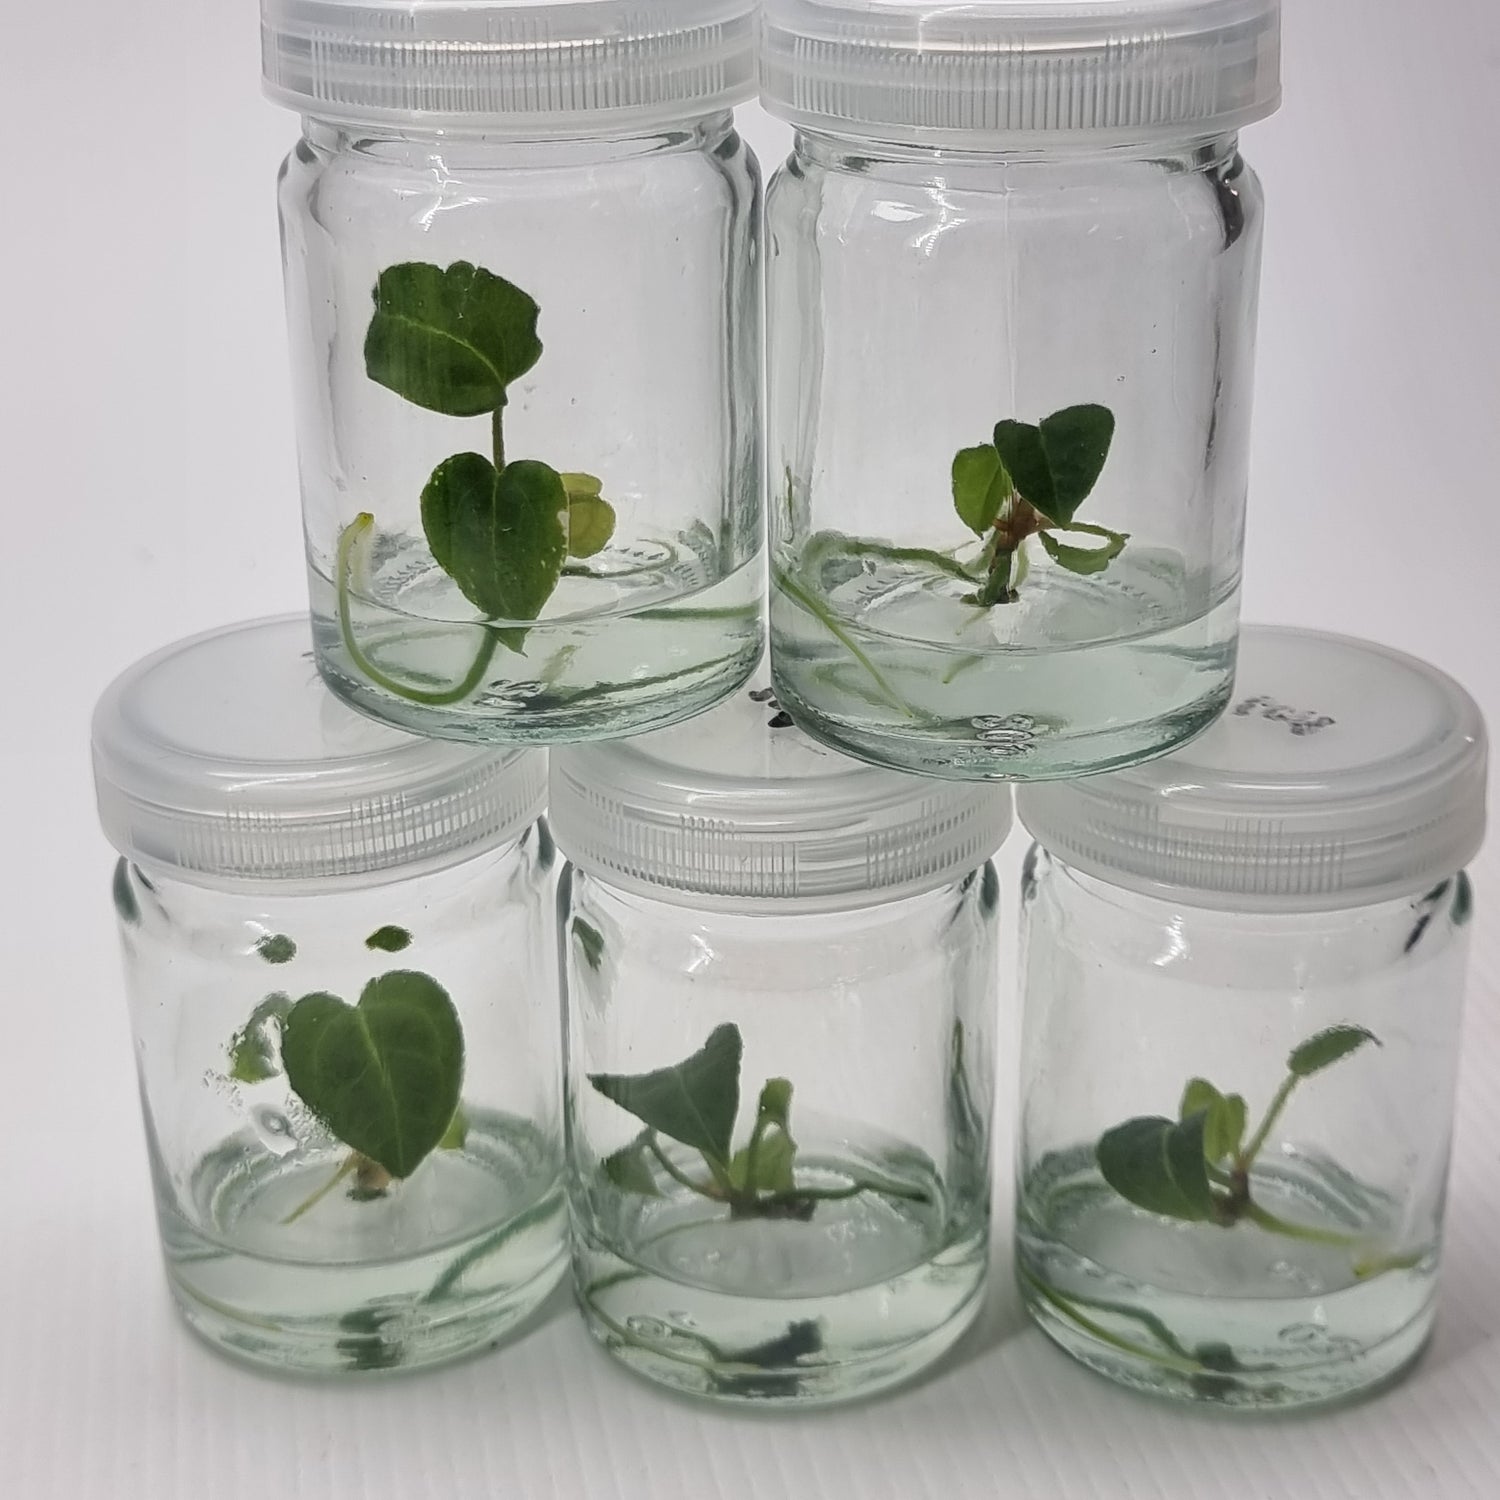 Anthurium Ace of Spades (Tezula) (1plant/flask) - Tissue culture kit for sale in Perth Australia